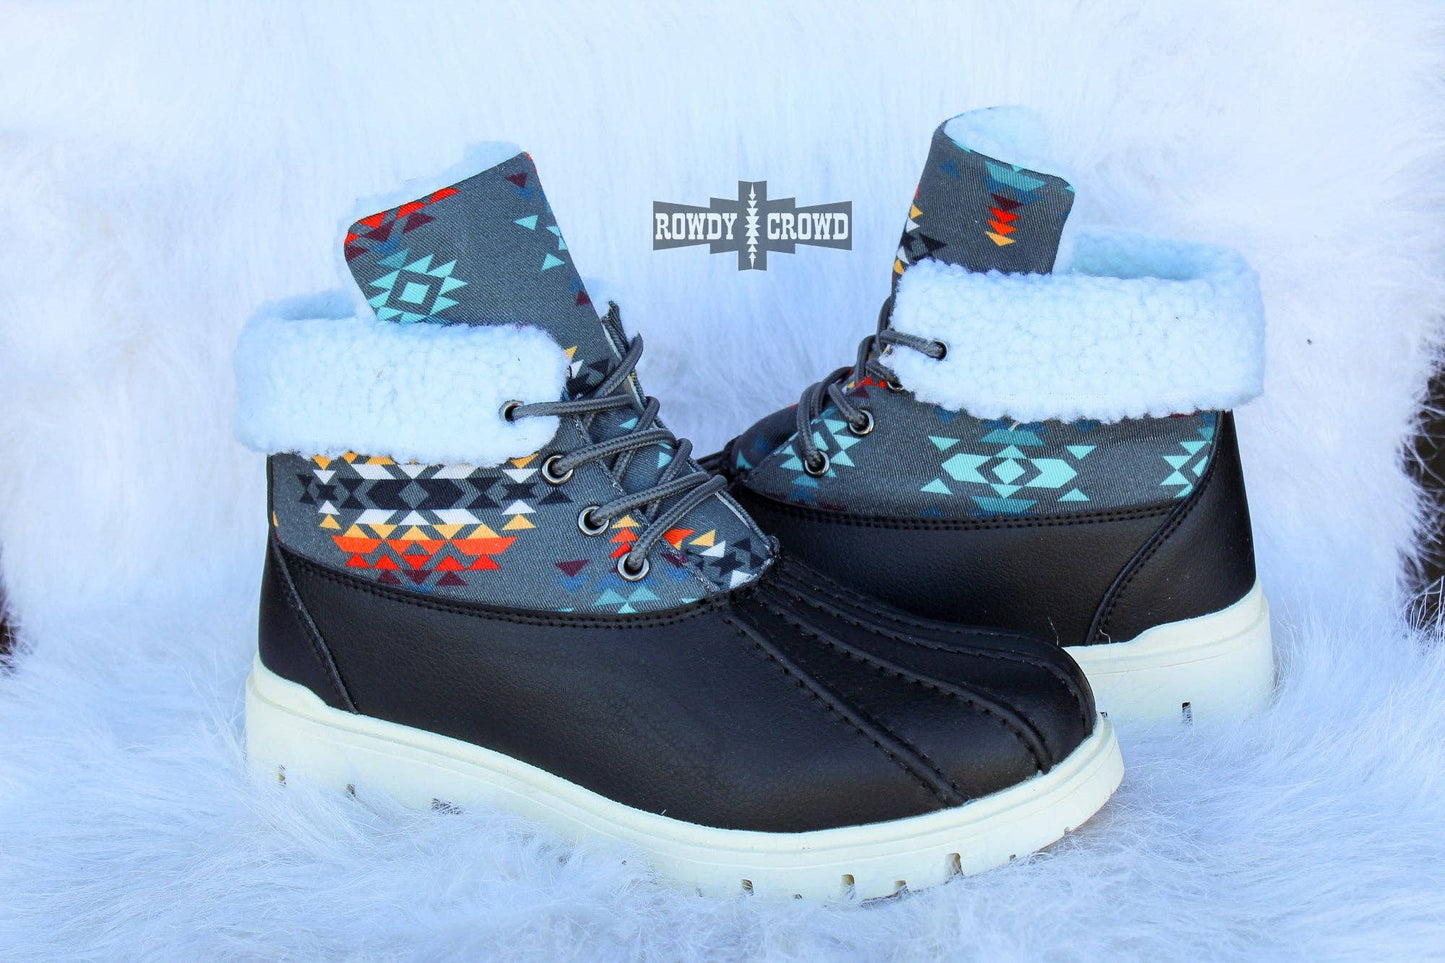 Down Canyon Duck Boots: 9